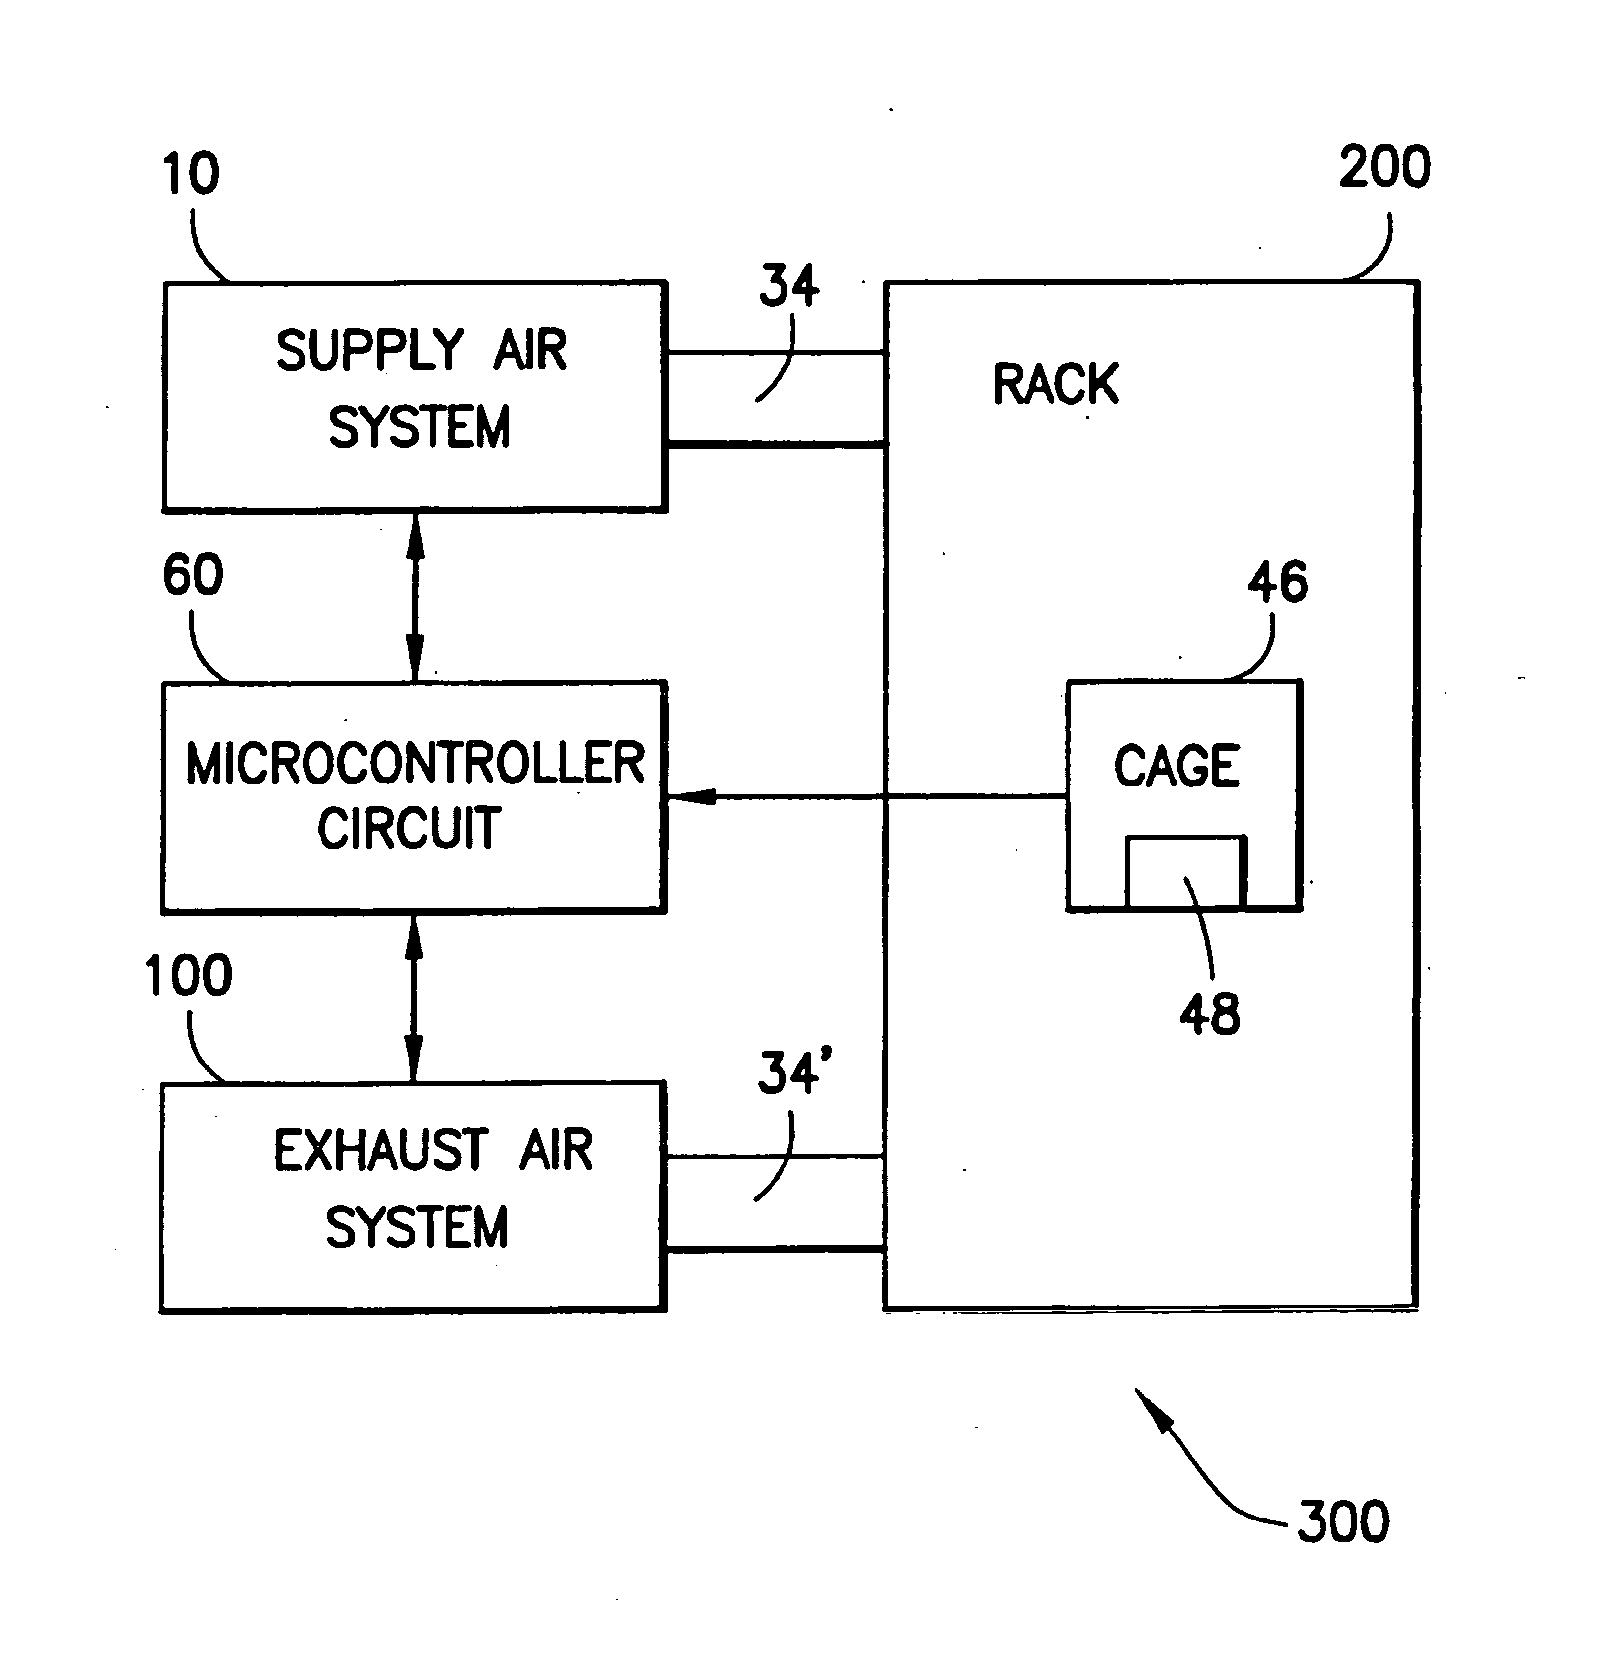 Air flow sensing and control for animal confinement system